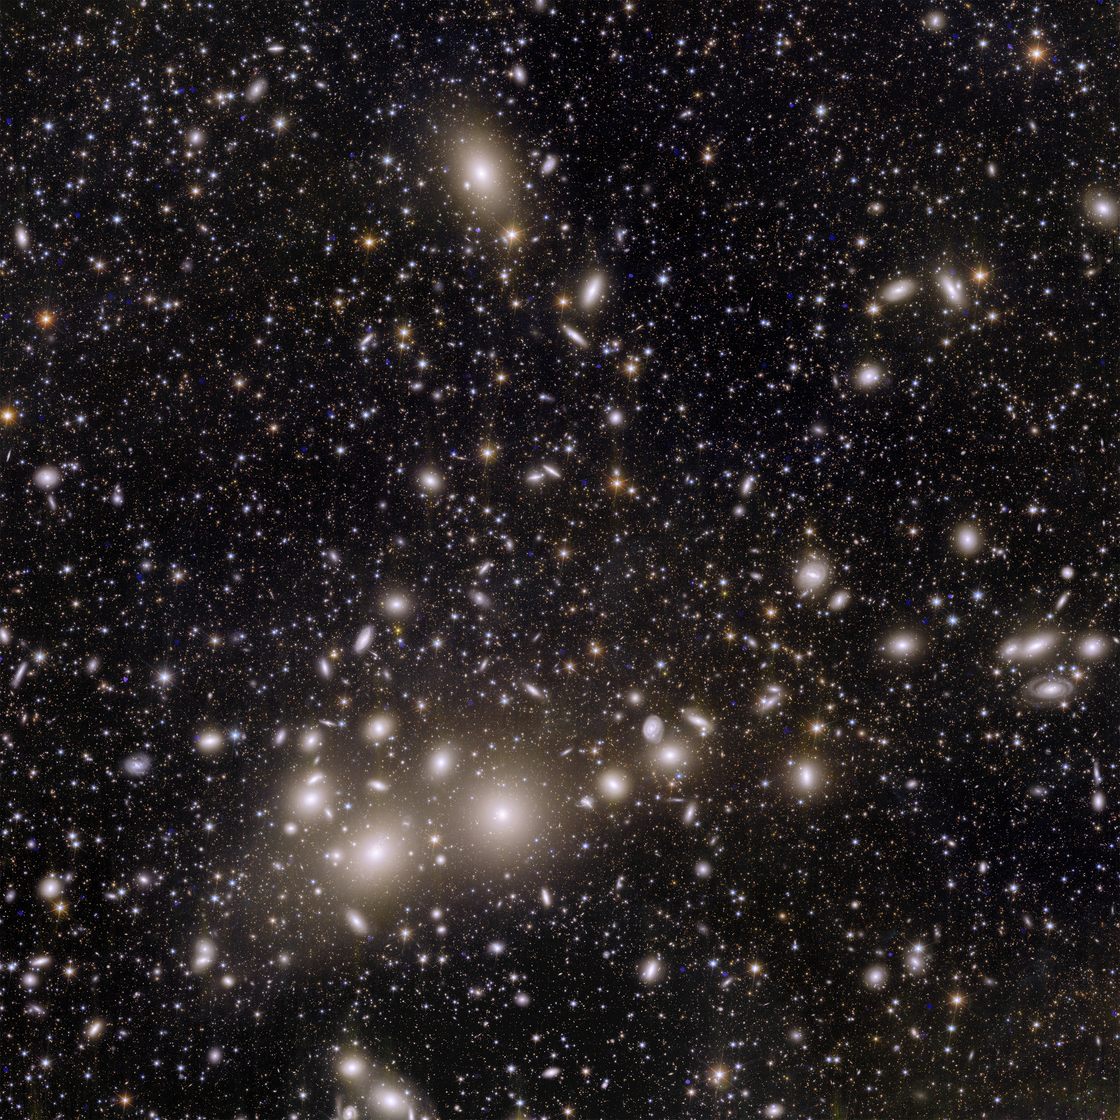 In this image captured by EUCLID, 1,000 galaxies are depicted as part of the Perseus Cluster, with an additional backdrop of over 100,000 galaxies situated even farther away. A/Euclid/Euclid Consortium/NASA, Bildbearbeitung durch J.-C. Cuillandre, G. Anselmi; CC BY-SA 3.0 IGO